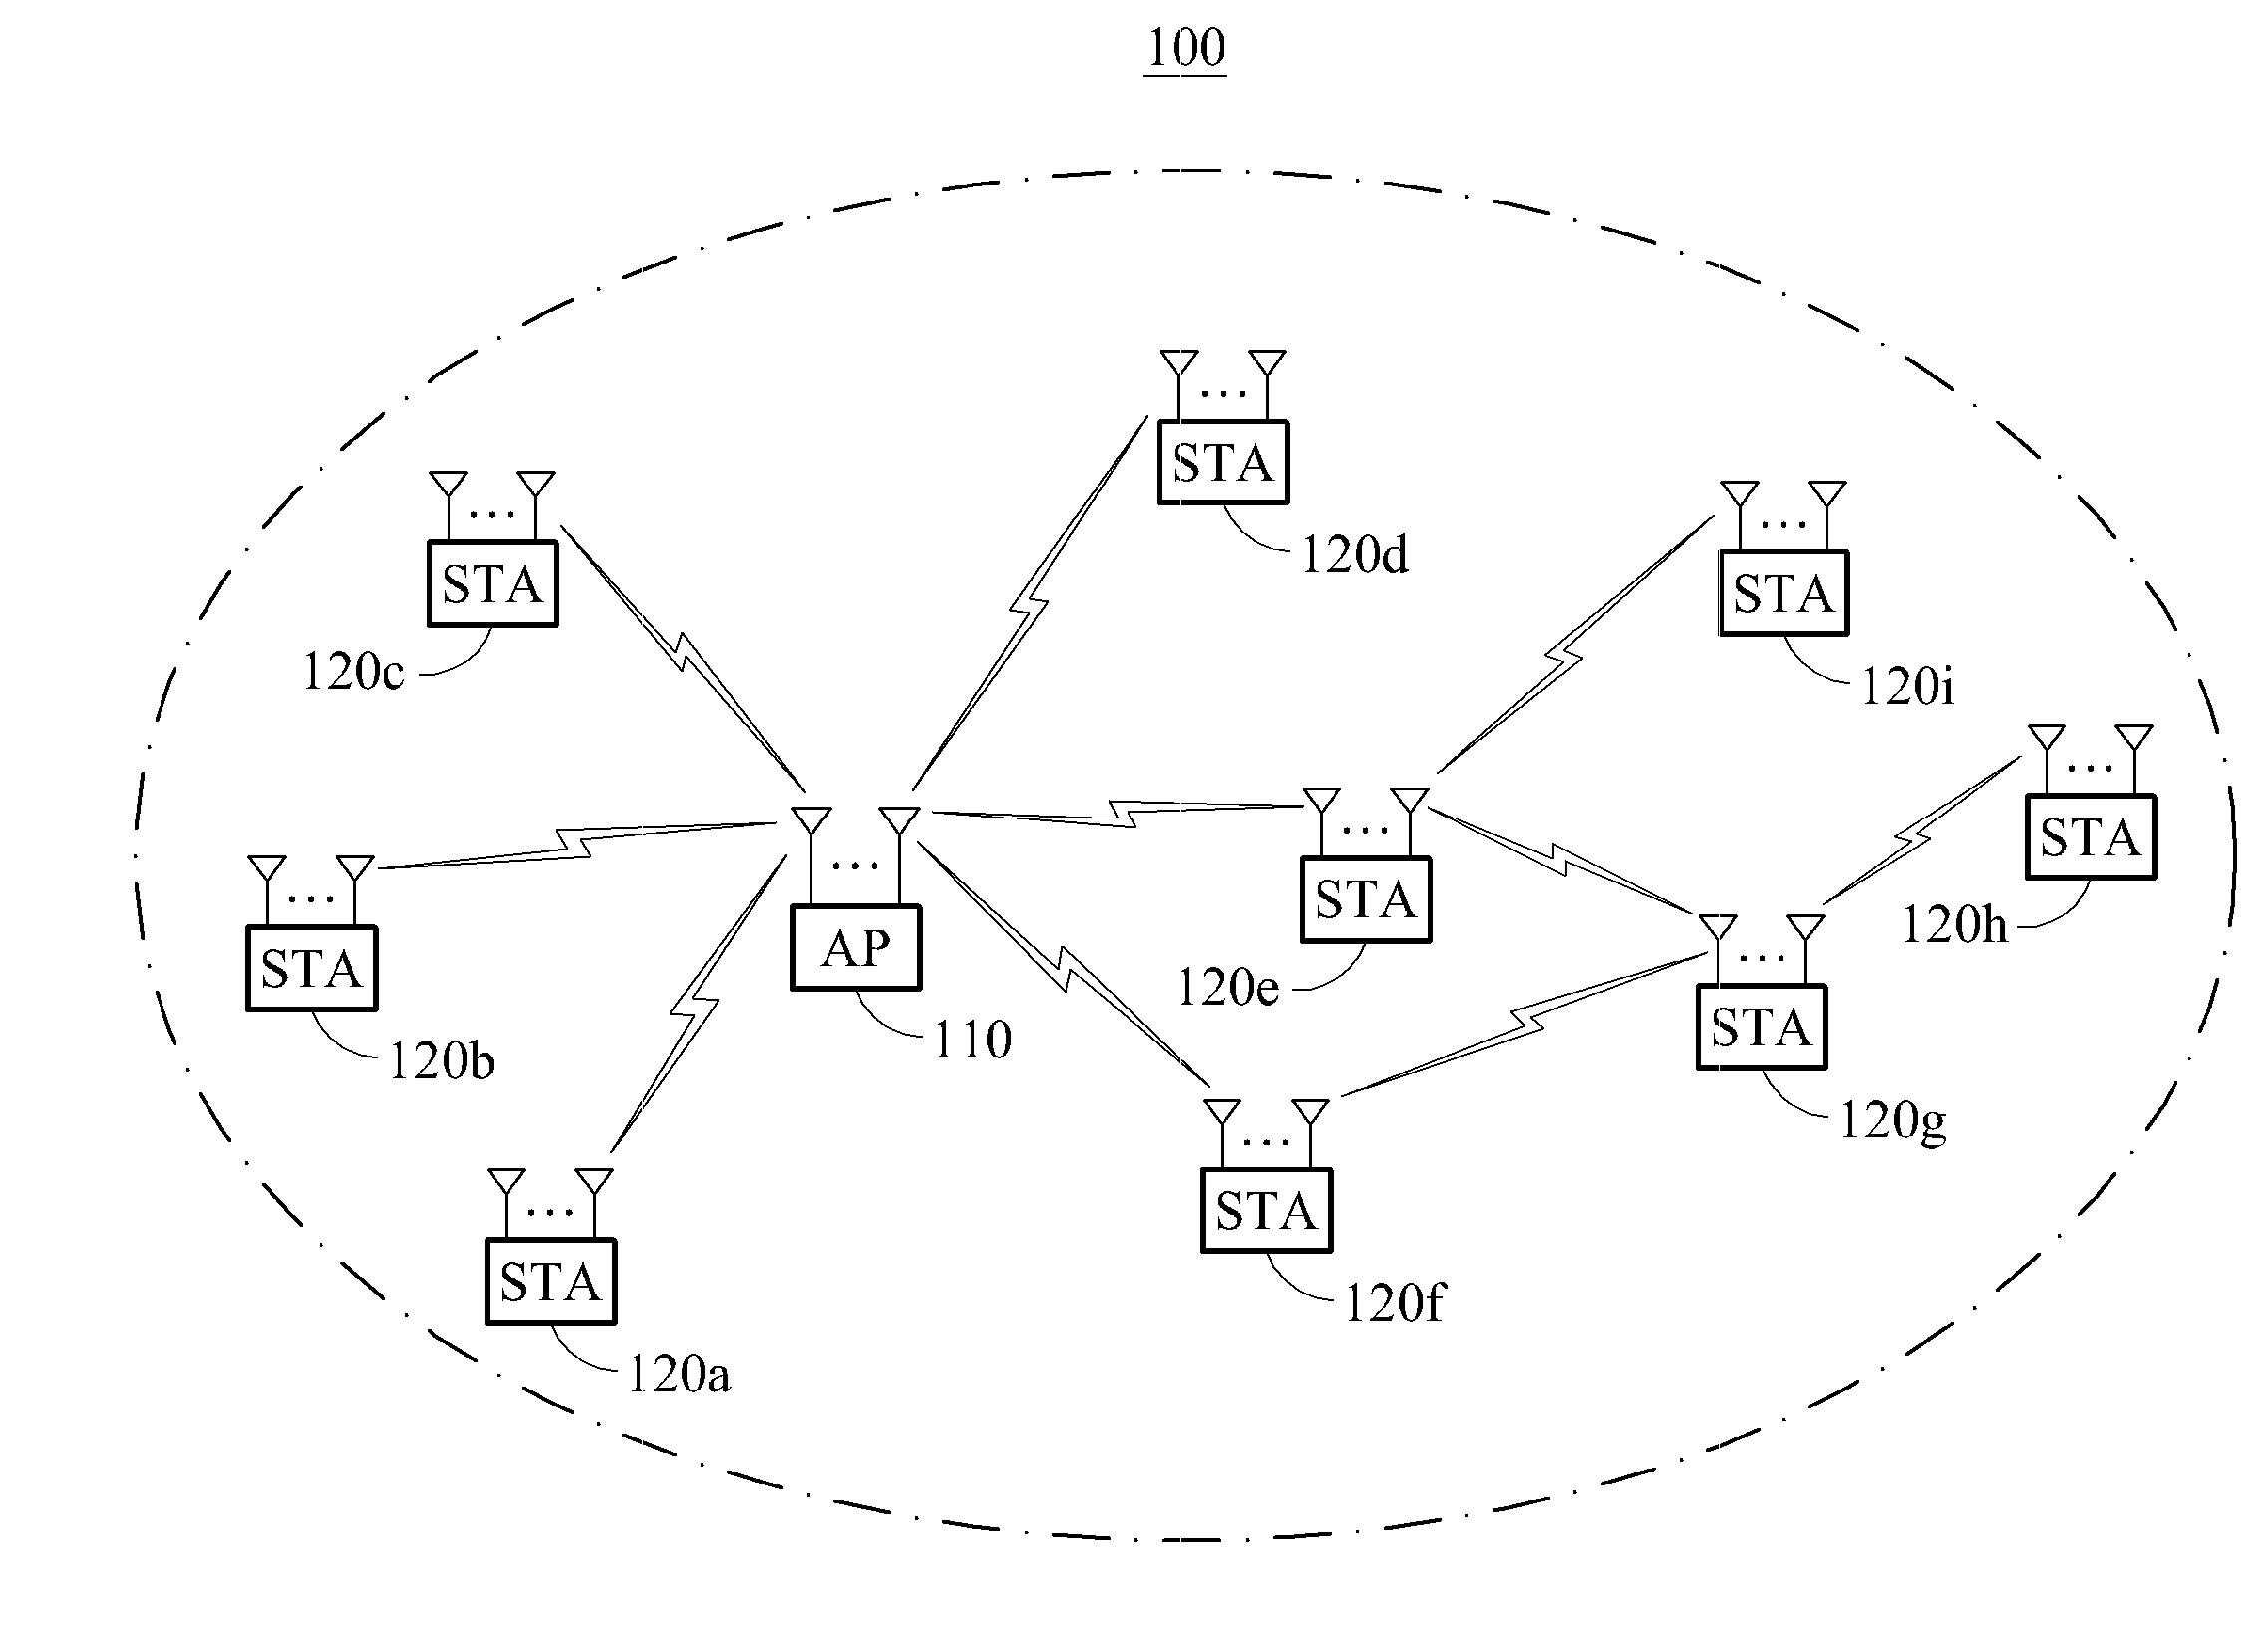 Wireless communication method for enhancing transmission efficiency through separating transmission interval in wireless local area network (WLAN) system